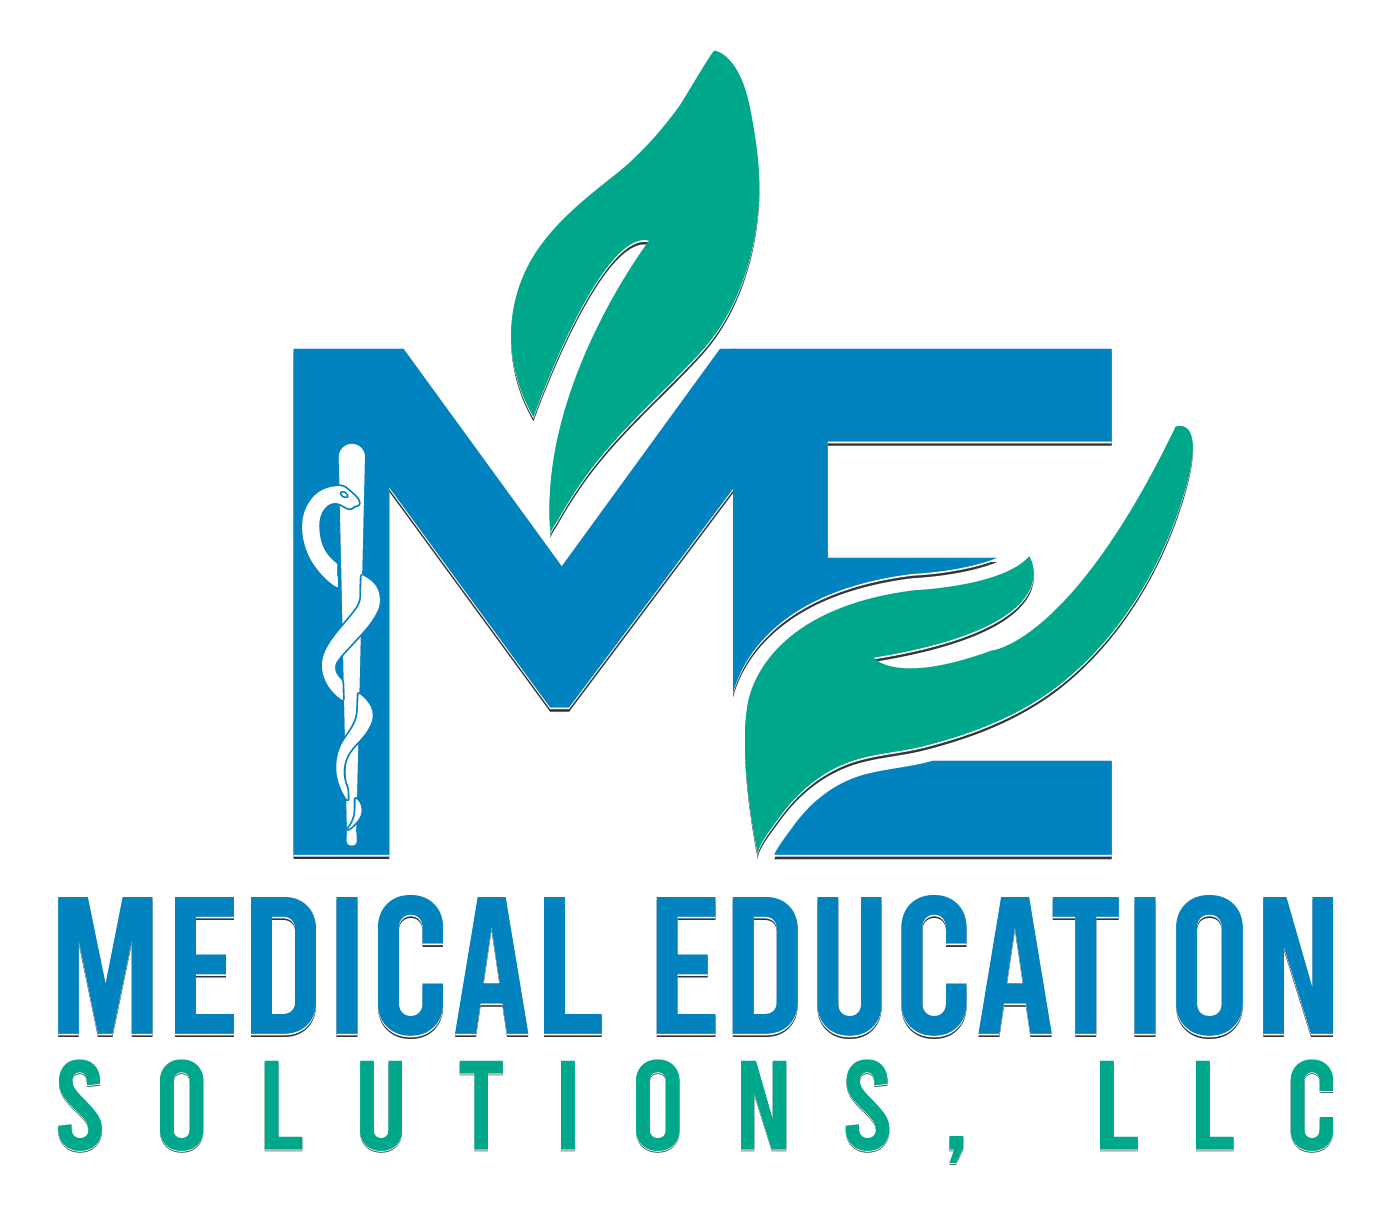 Clinical And Education Solutions logo